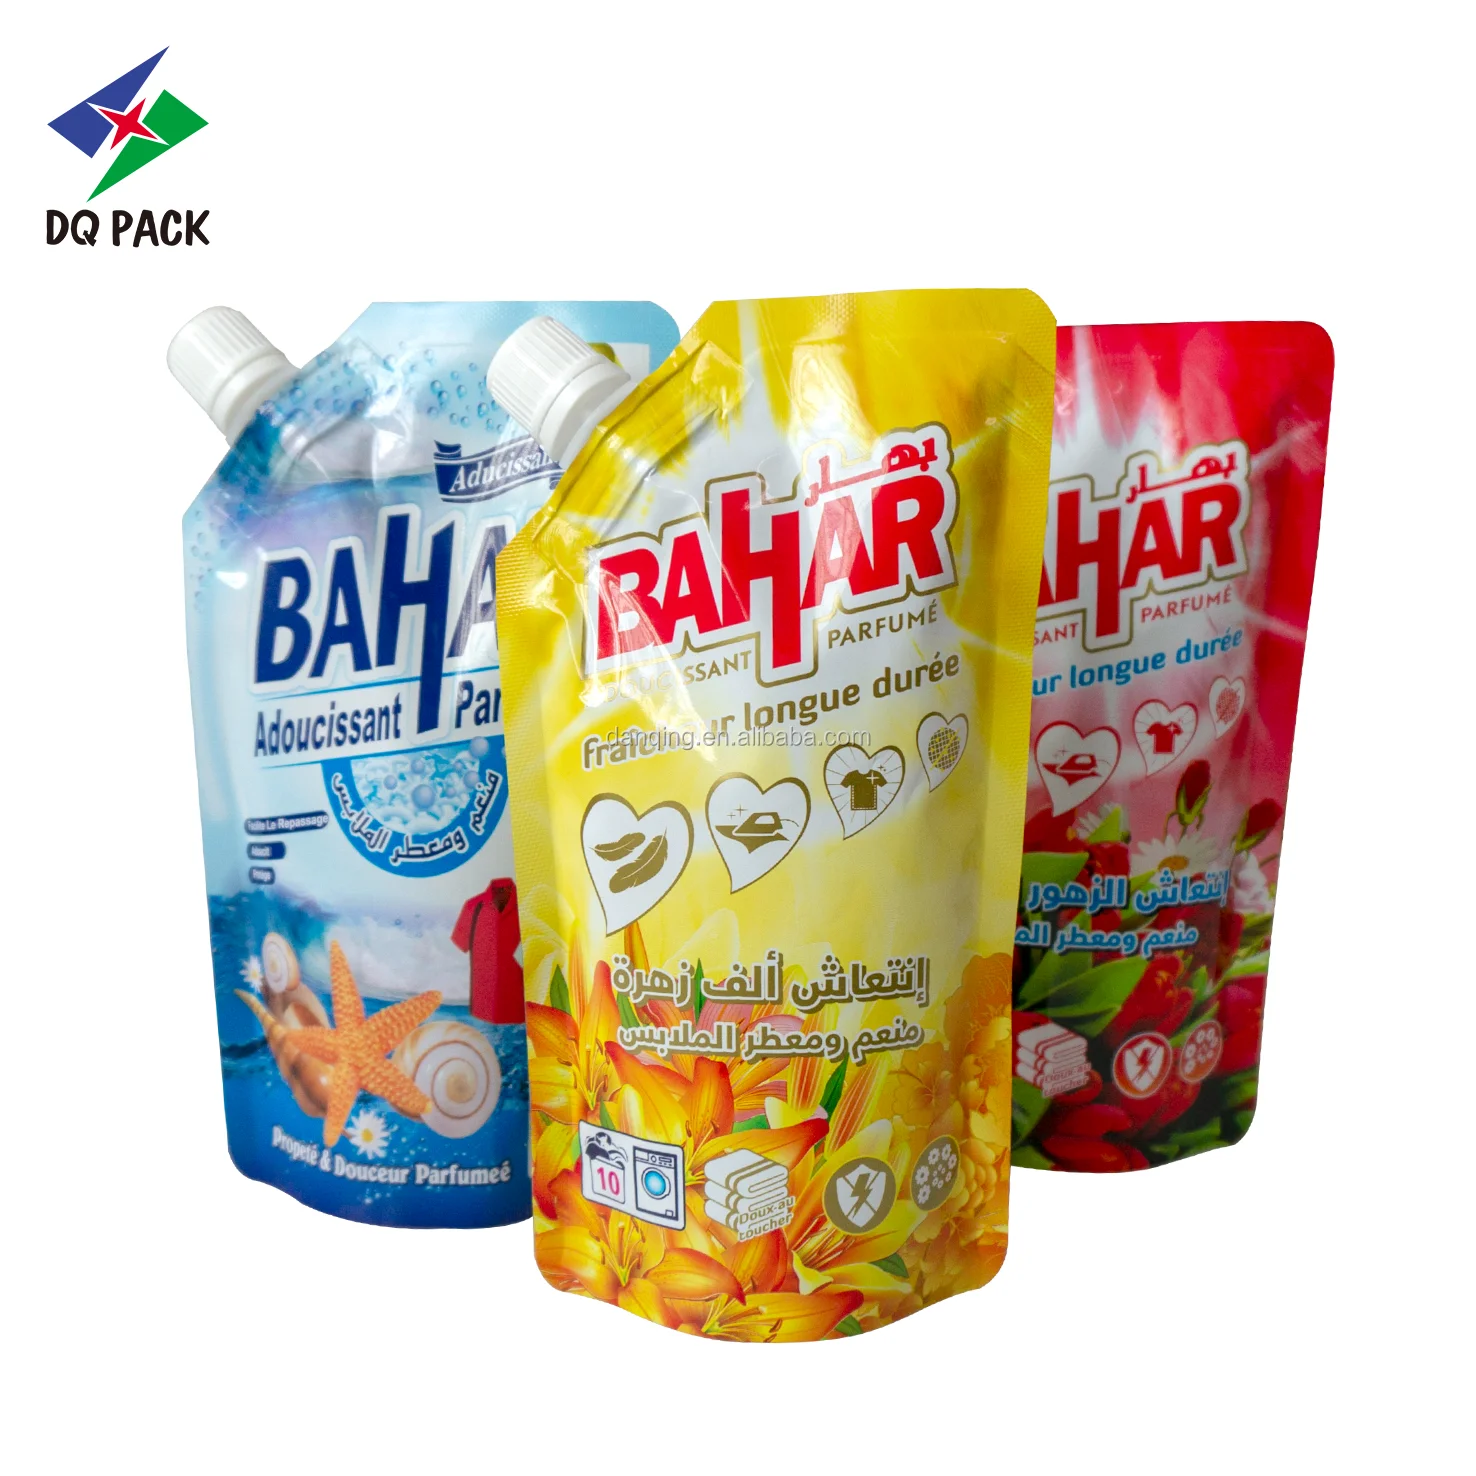 DQ PACK CHINA plastic flexible bag other packaging materials packing supplier stand up detergent liquid spout bag